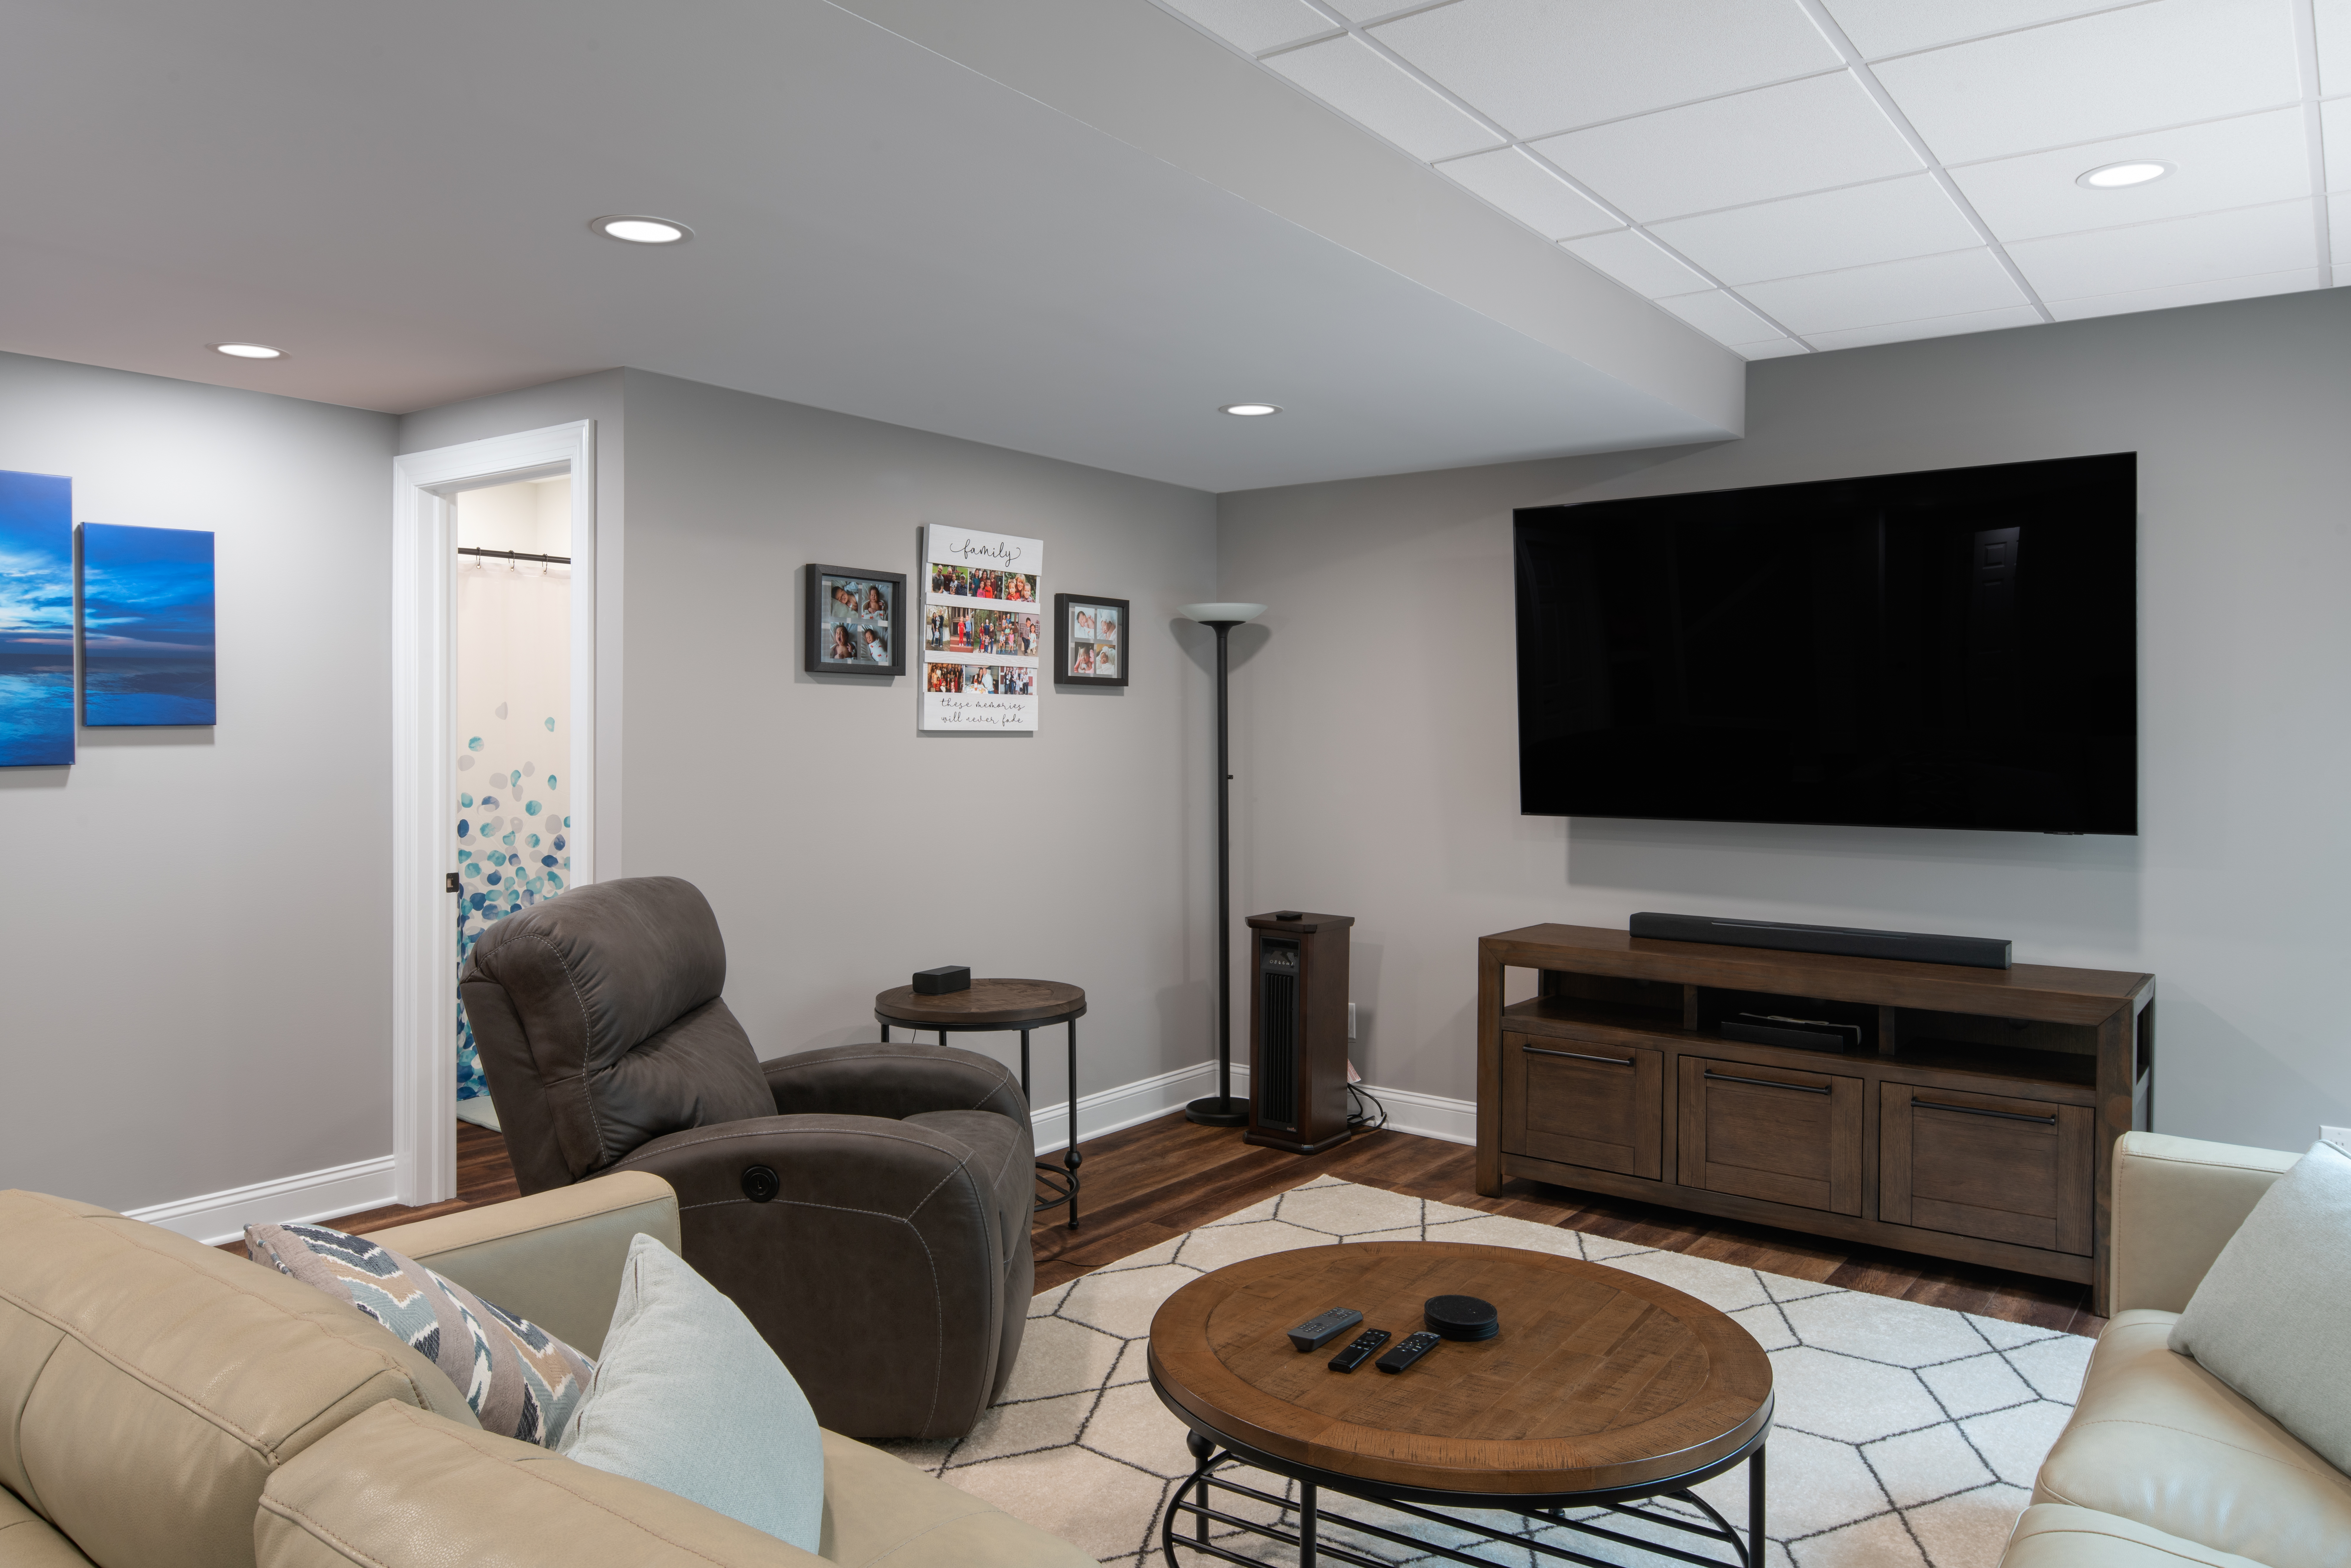 Cozy and bright basement entertainment space with partial drywall and partial tiled ceiling